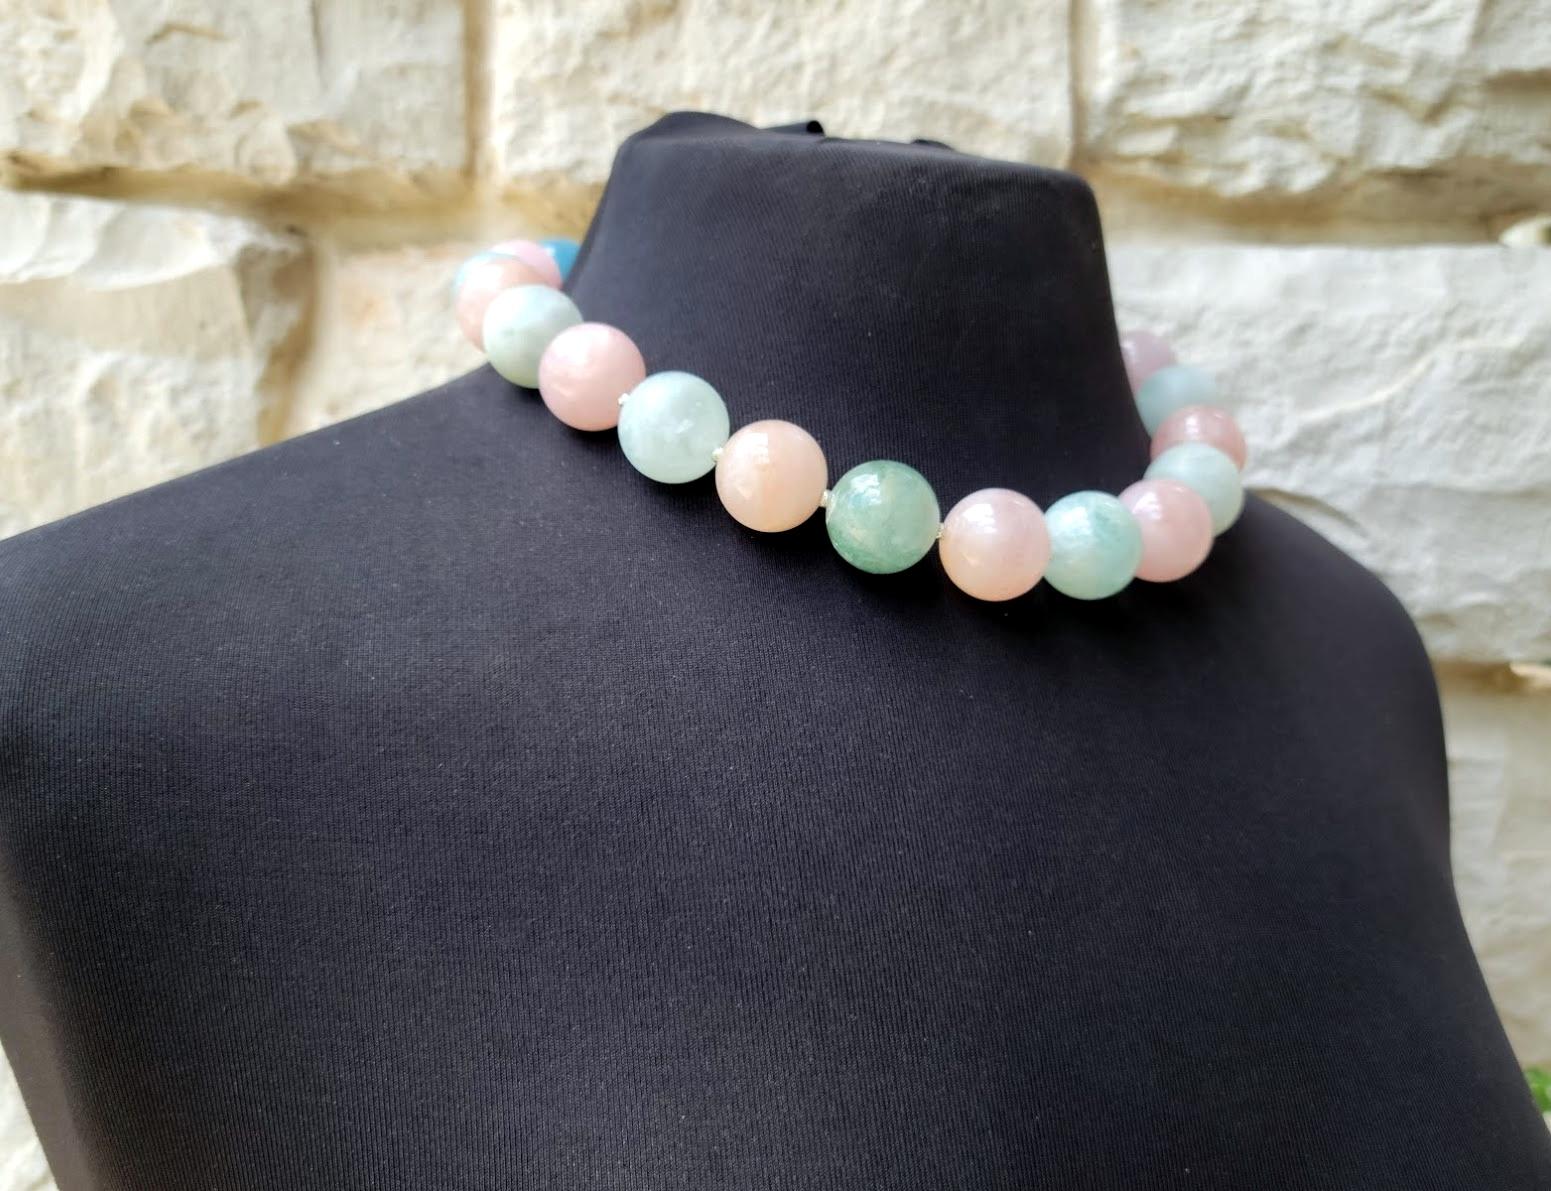 The length of the necklace is 19 inches (48 cm). The size of the smooth round beads is 20 mm.
The color of the beads is a soft shade of light green, light blue, pale peachy pink, and pale orange. Very gentle soft pastel colors! Huge statement beads